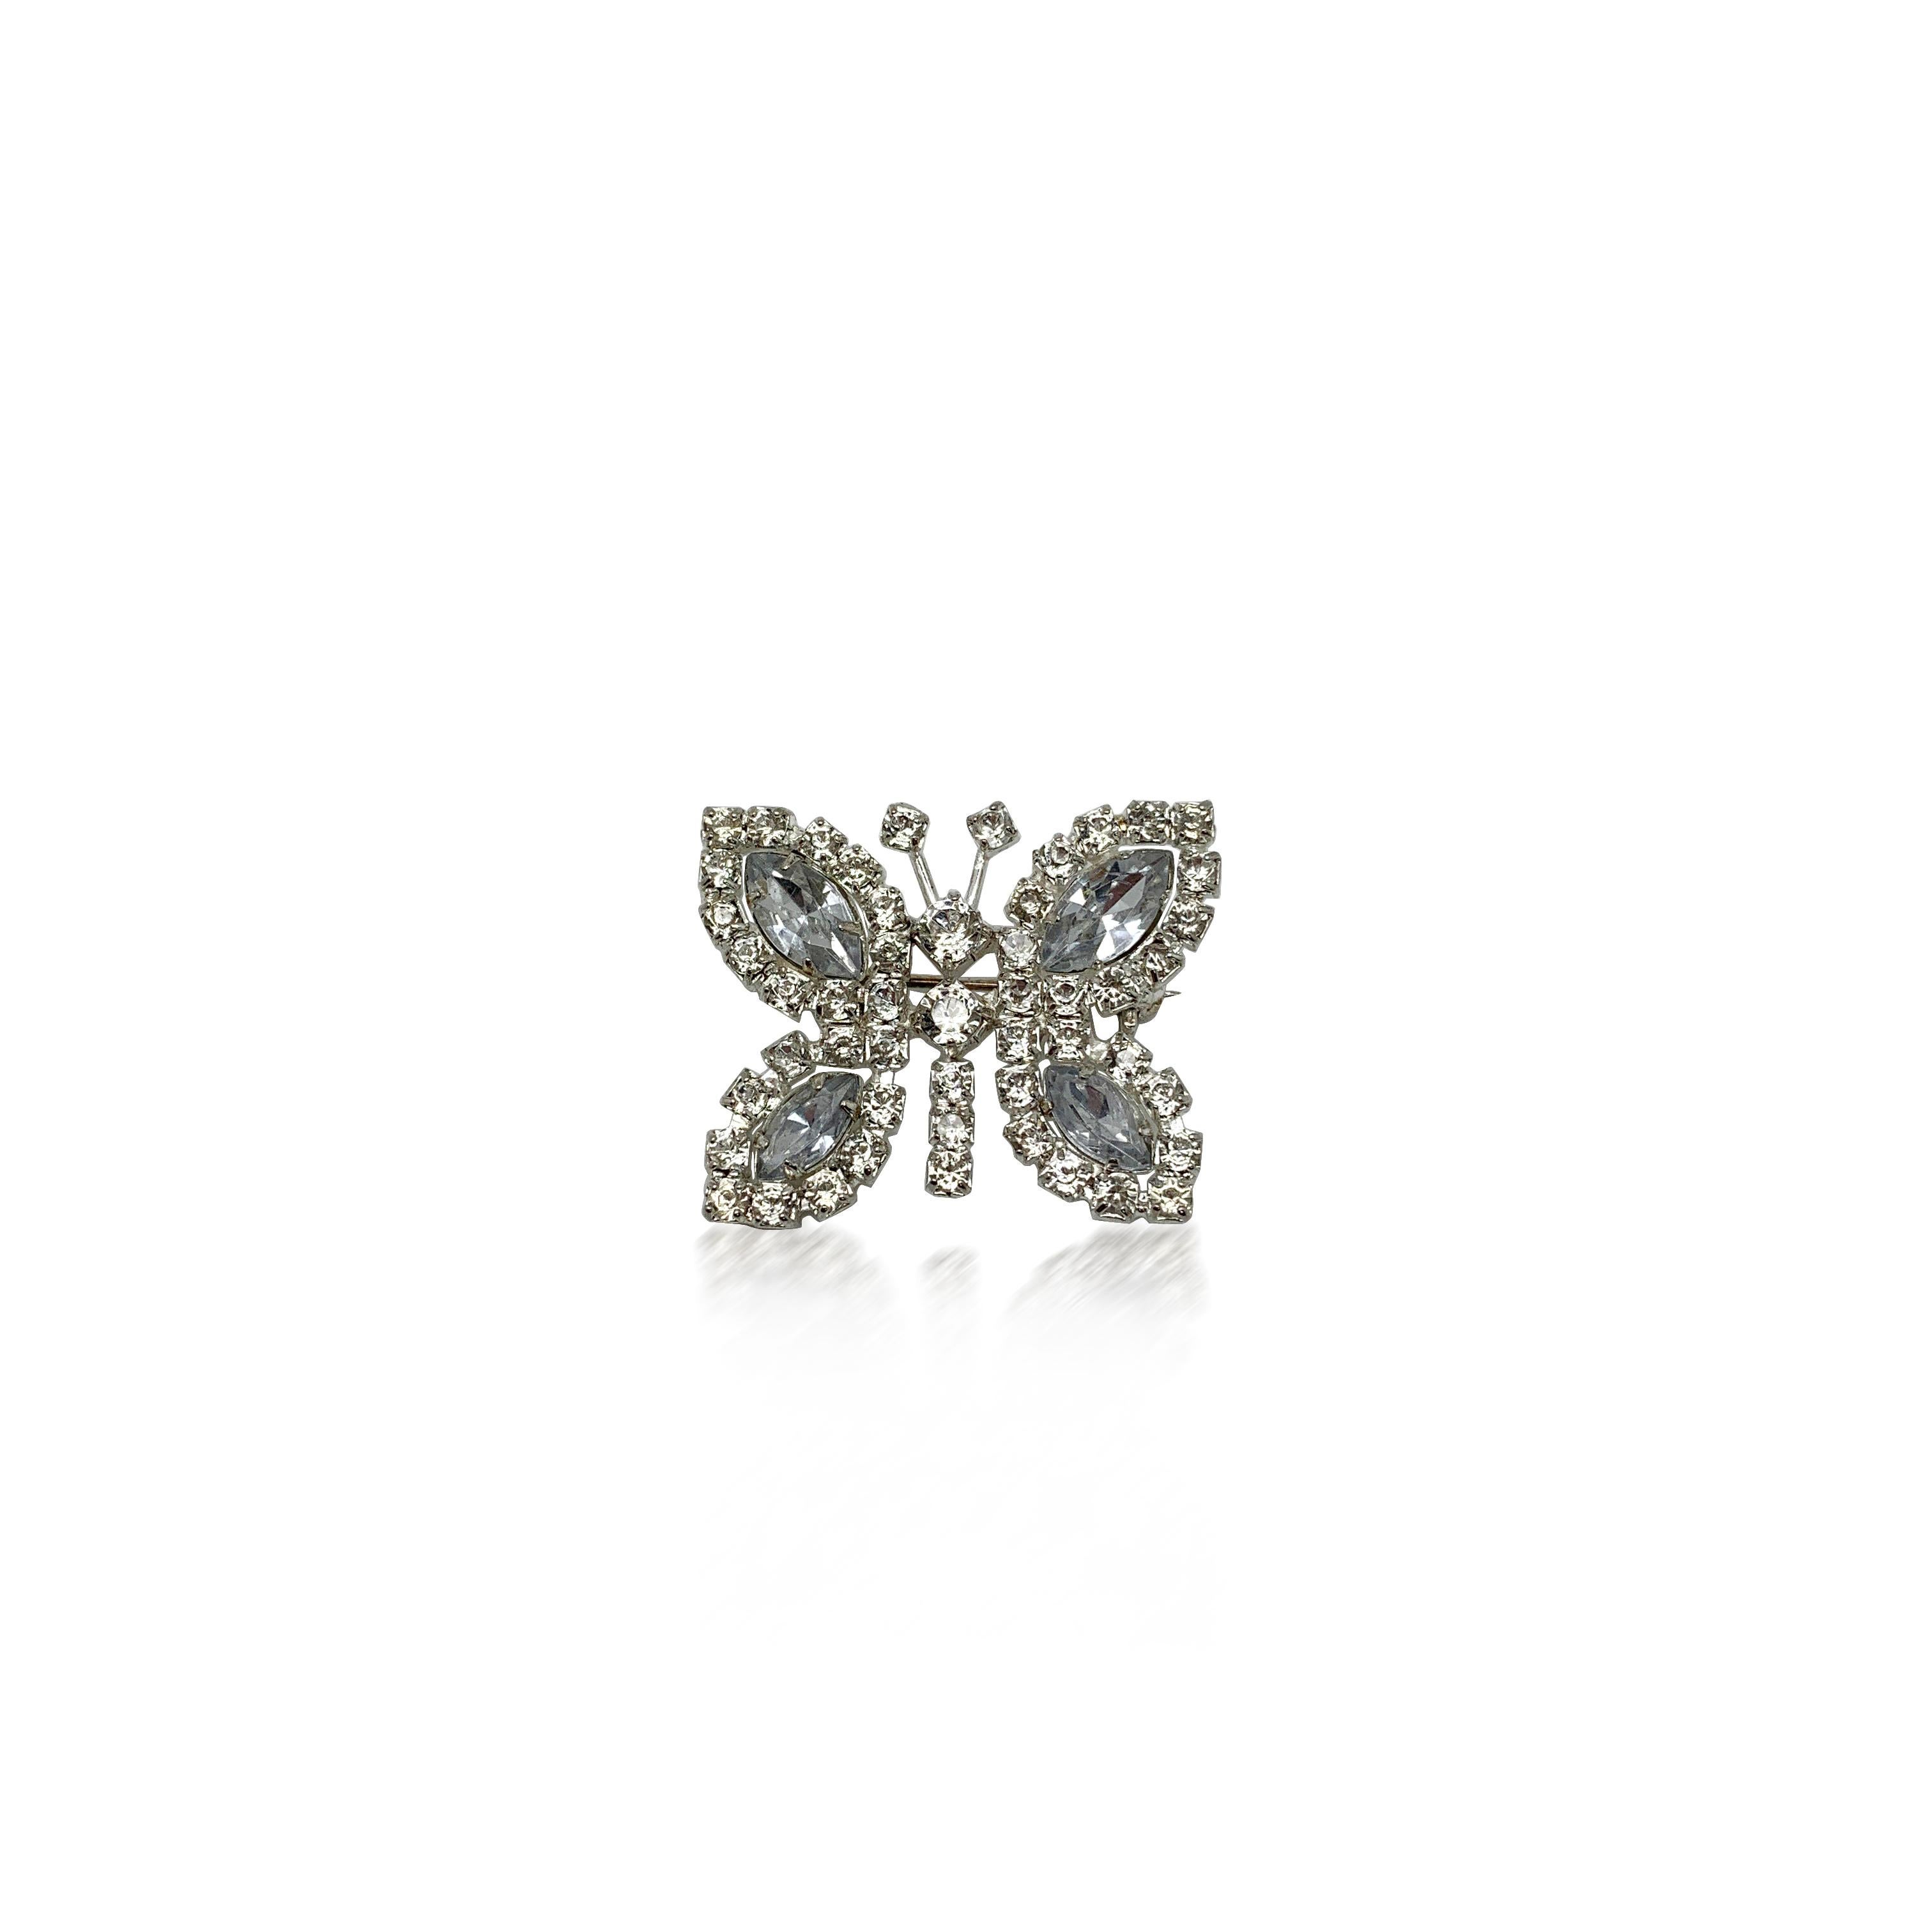 A small and very sweet vintage rhinestone butterfly pin. Featuring fancy cut crystals each one claw set.
Condition: Very good without damage or noteworthy wear. 
Materials: silver plated metal, glass crystals
Signed: unsigned
Fastening: rollover